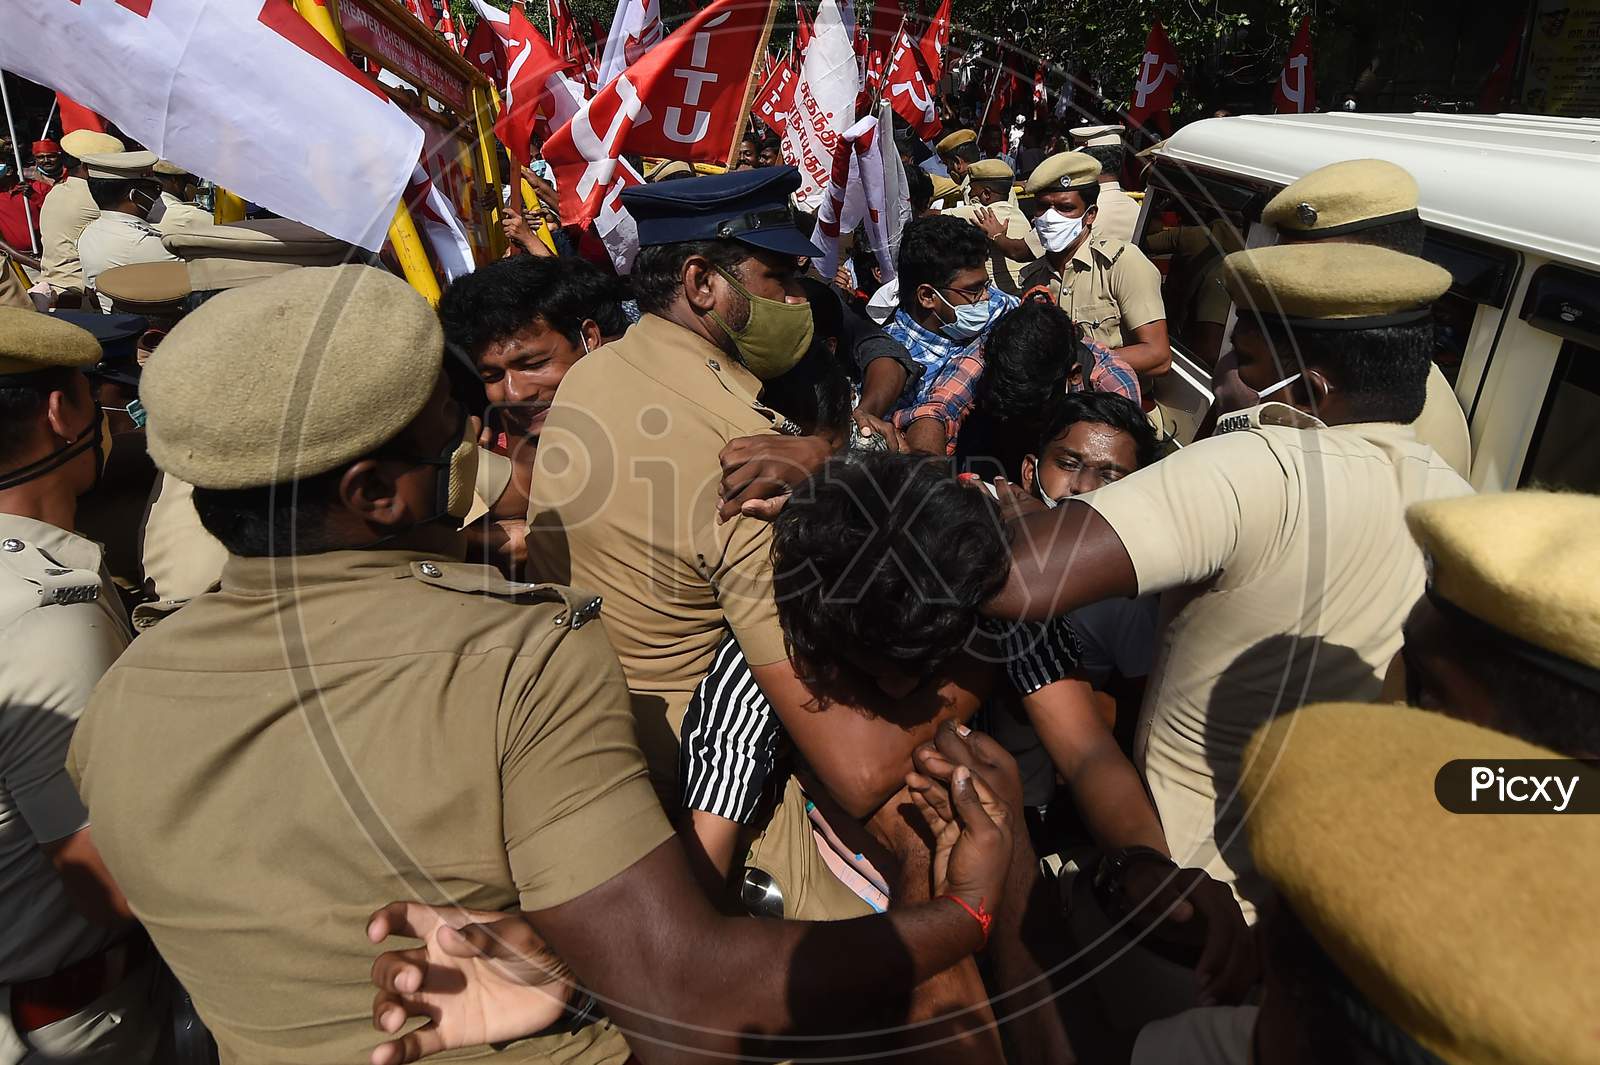 Communist Party Of India (Cpi) Activists And Supporters Scuffle With Police During A Demonstration Supporting A Nationwide General Strike Called By Farmers To Protest Against The Recent Agricultural Reforms In Chennai On December 8, 2020.